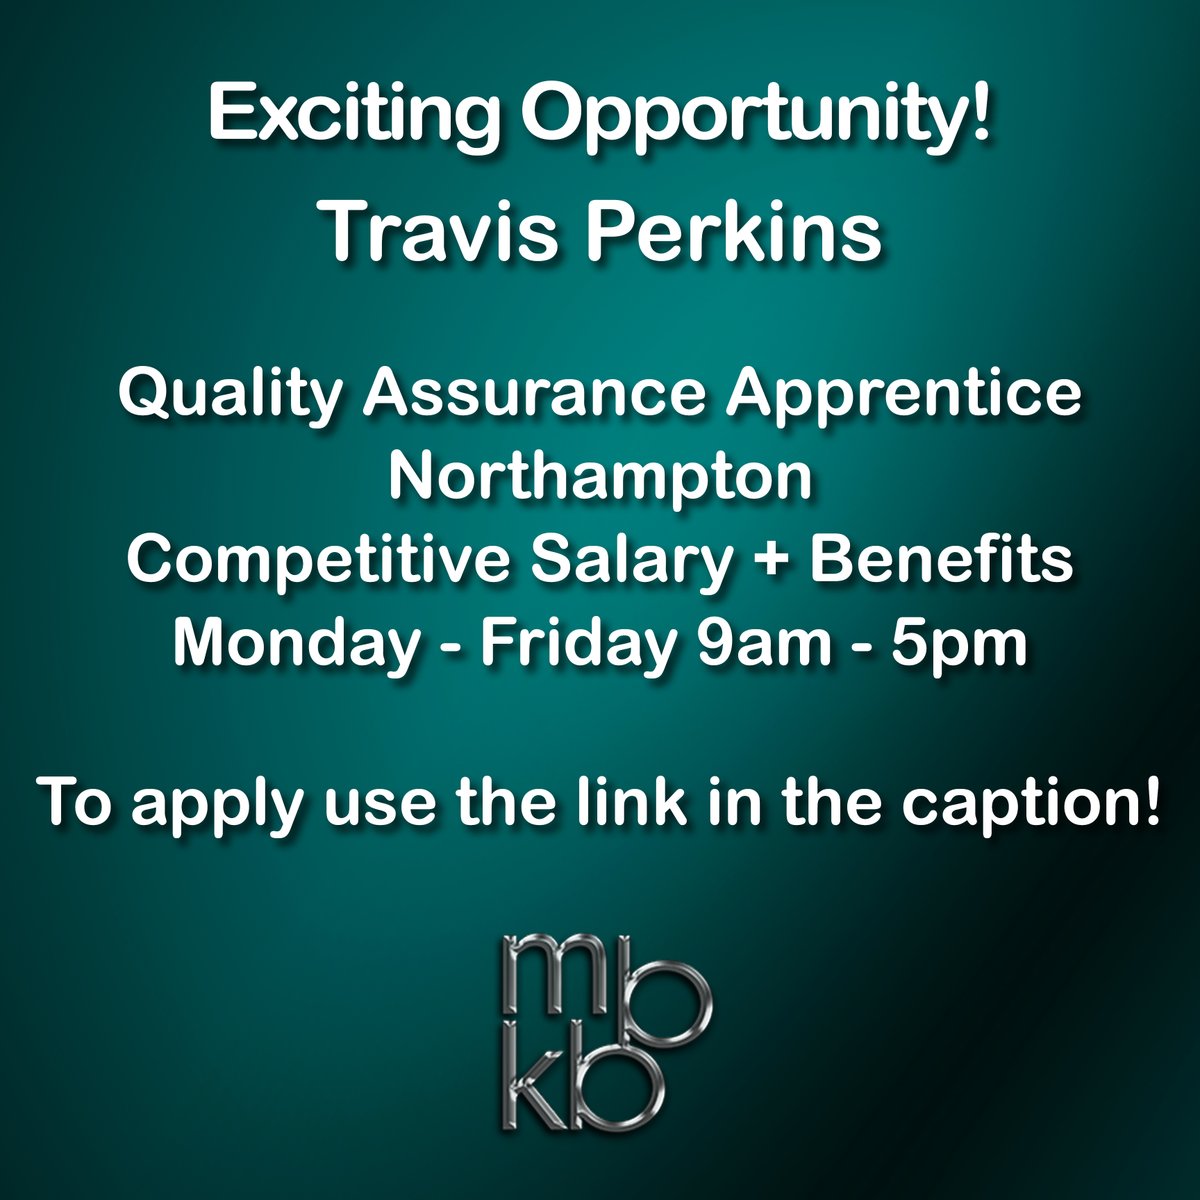 Travis Perkins have a fantastic vacancy for a Quality Assurance Apprentice!

For more info & to apply use this link - buff.ly/3DRavza

#MBKB #MBKBTraining #OfstedOutstandingTrainingProvider #ApprenticeshipVacancies #ExcitingOpportunity #TravisPerkins #QualityAssurance